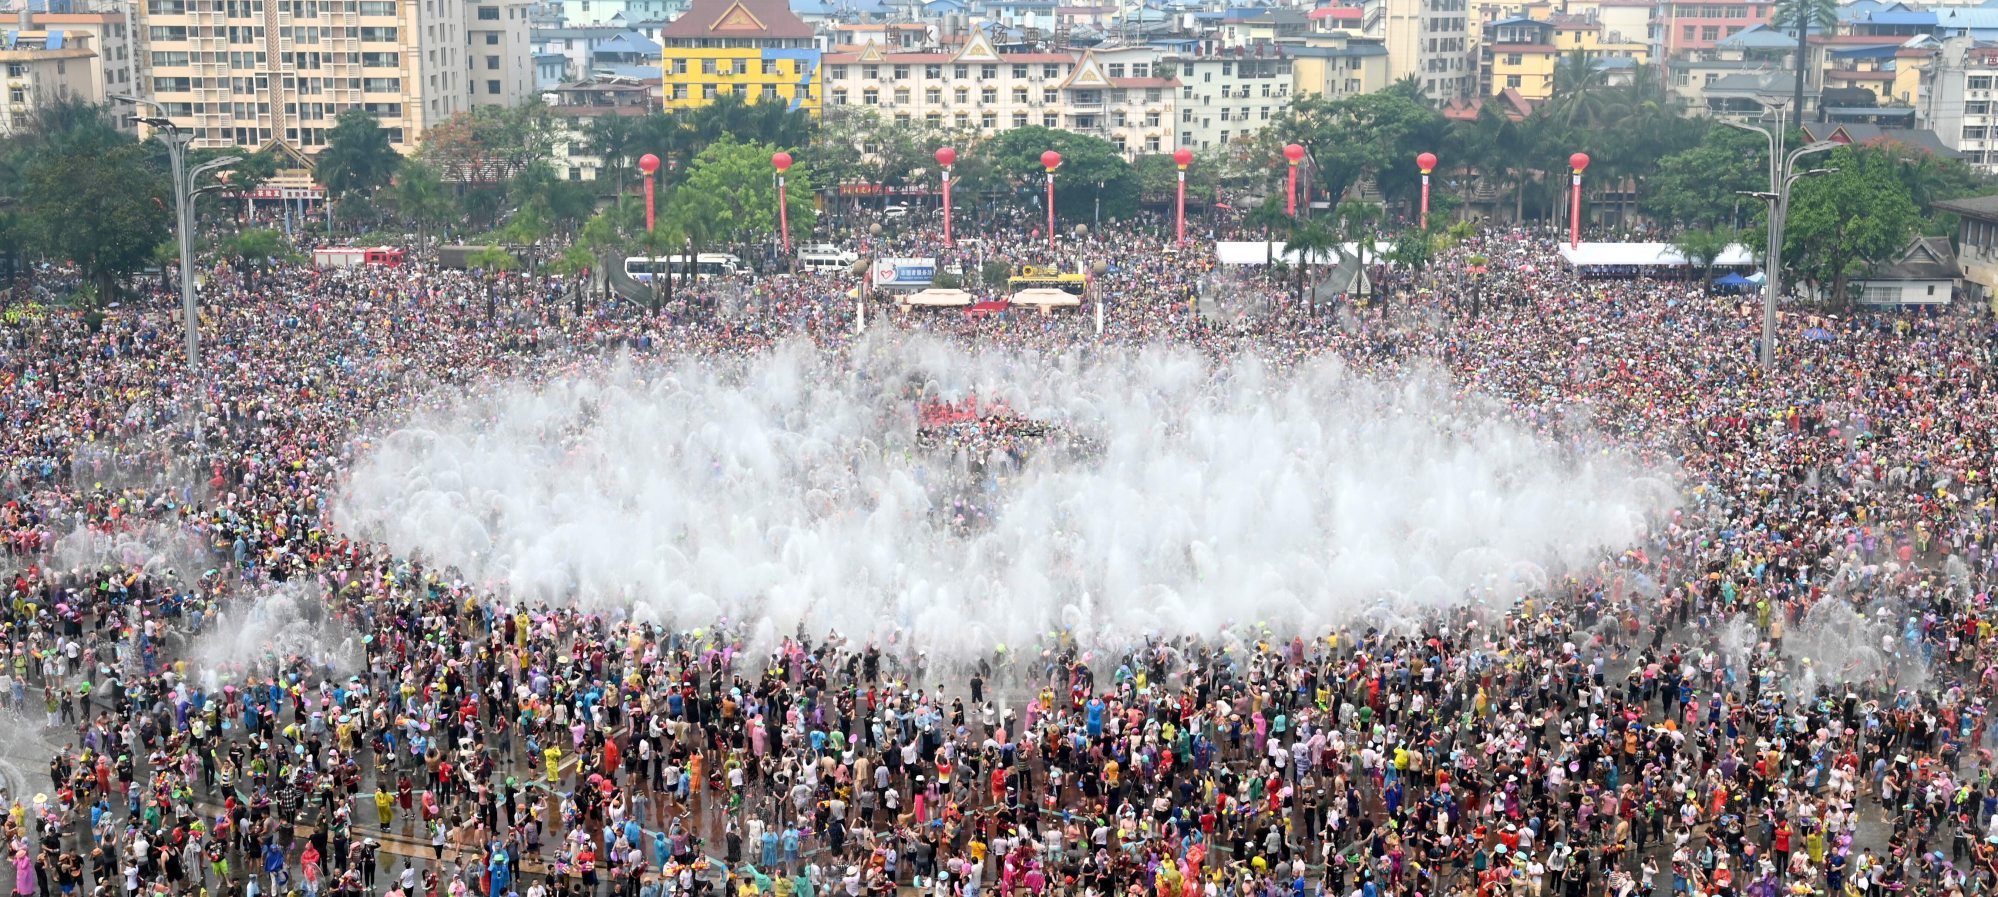 Water-sprinkling festival in Jinghong city of Xishuangbanna in April 2019. Photo: Xinhua